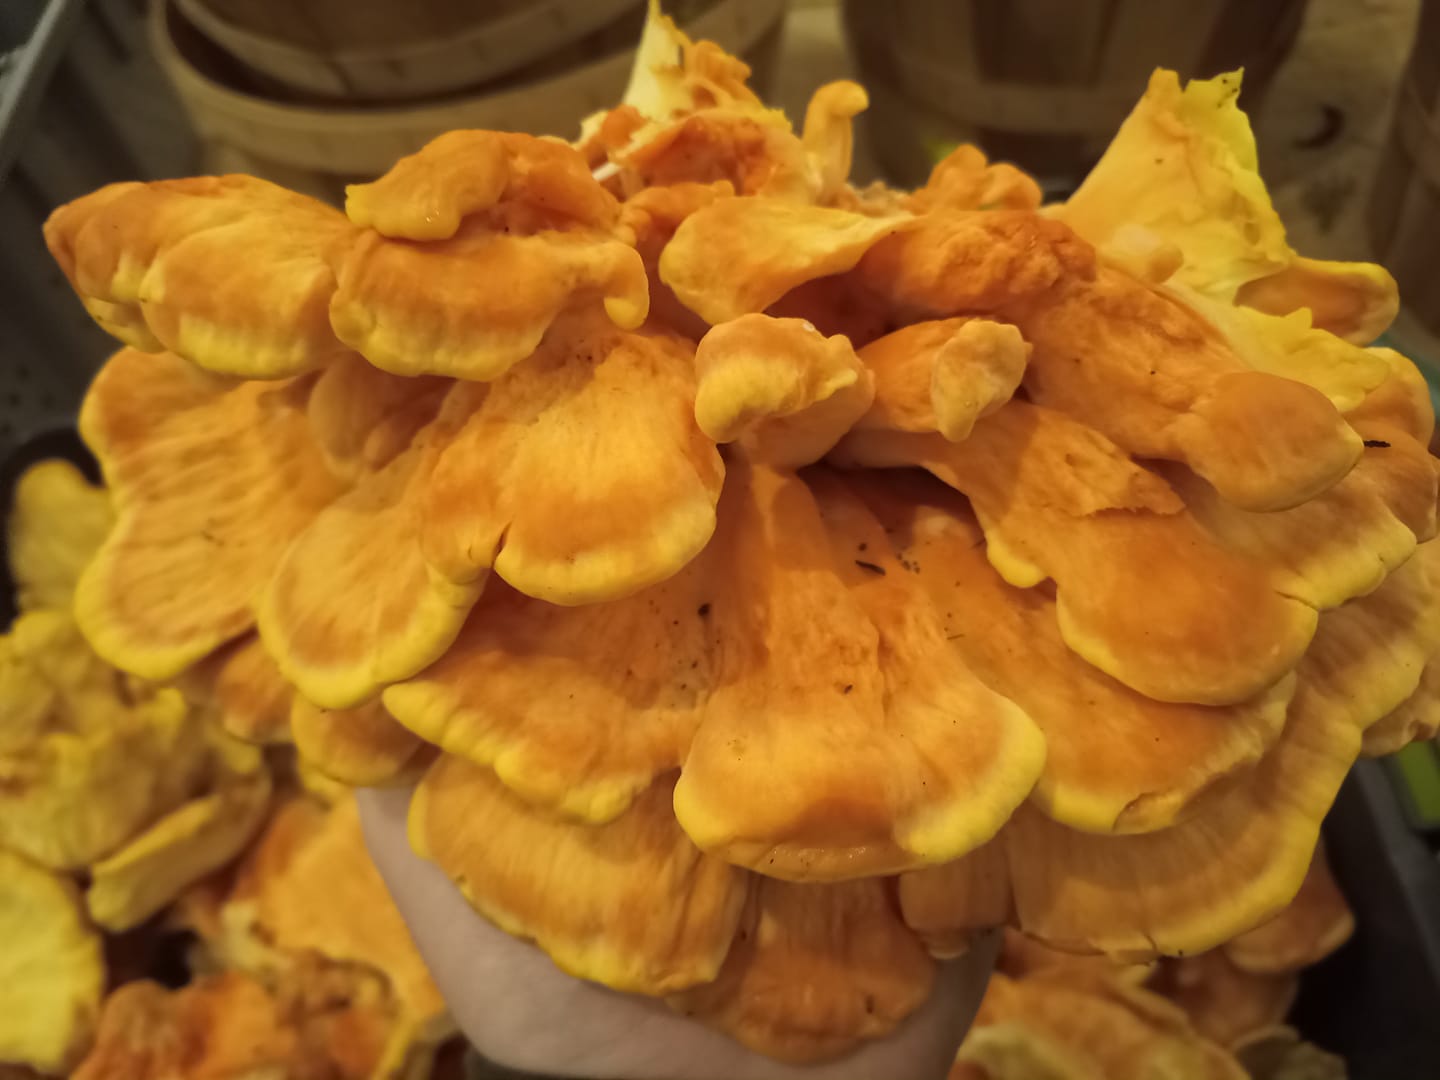 We have dozens of pounds of chicken of the woods for sale if anyone is interested.